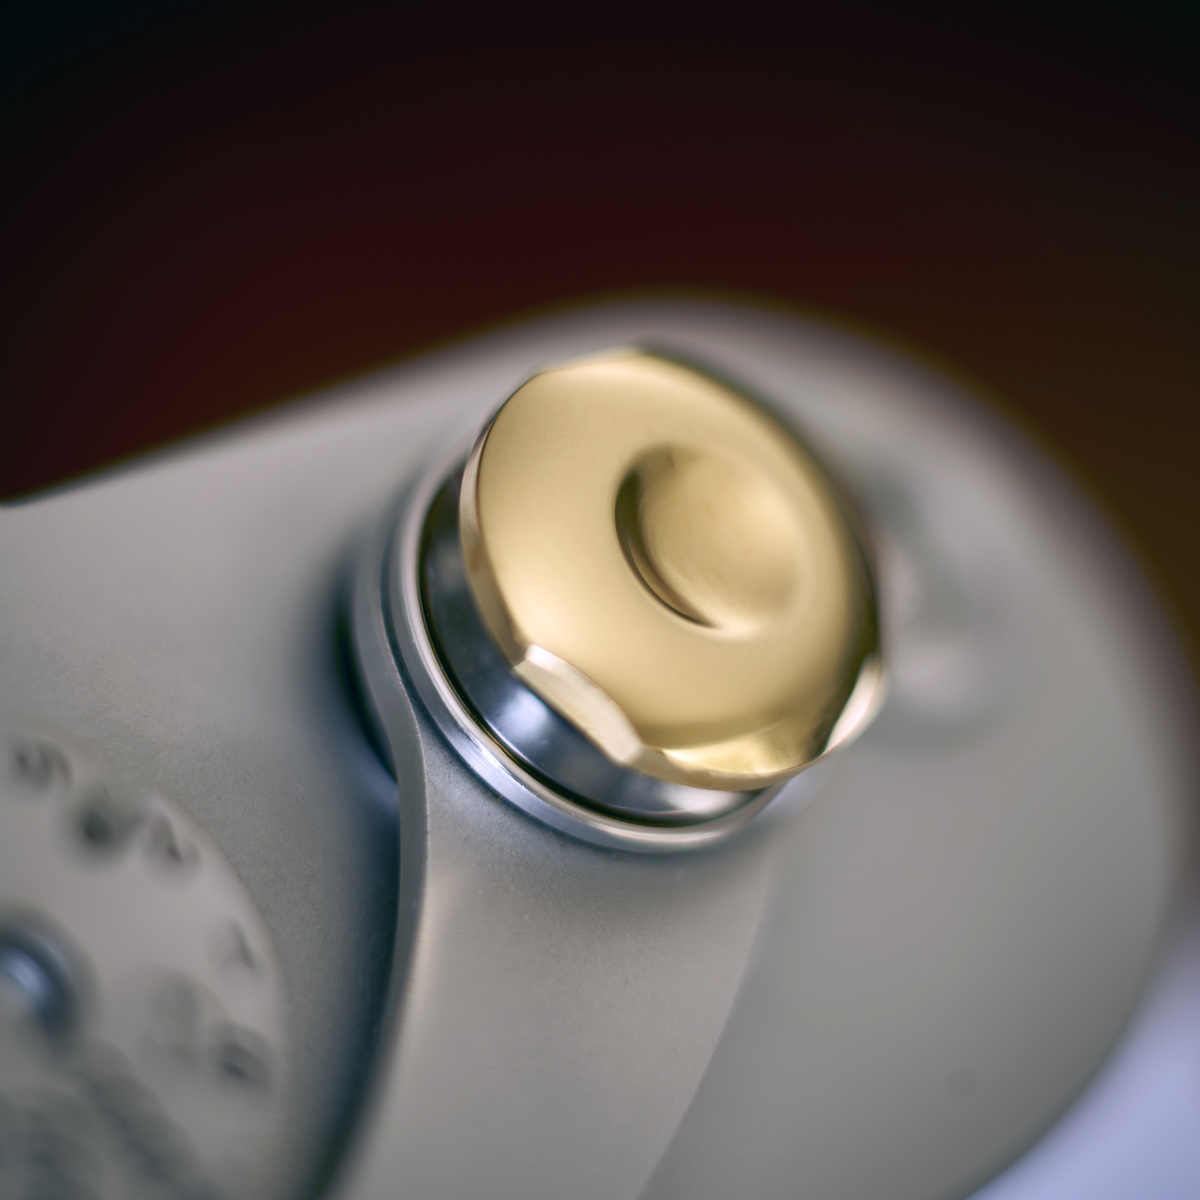 New Komaru polished brass limited edition soft-release button